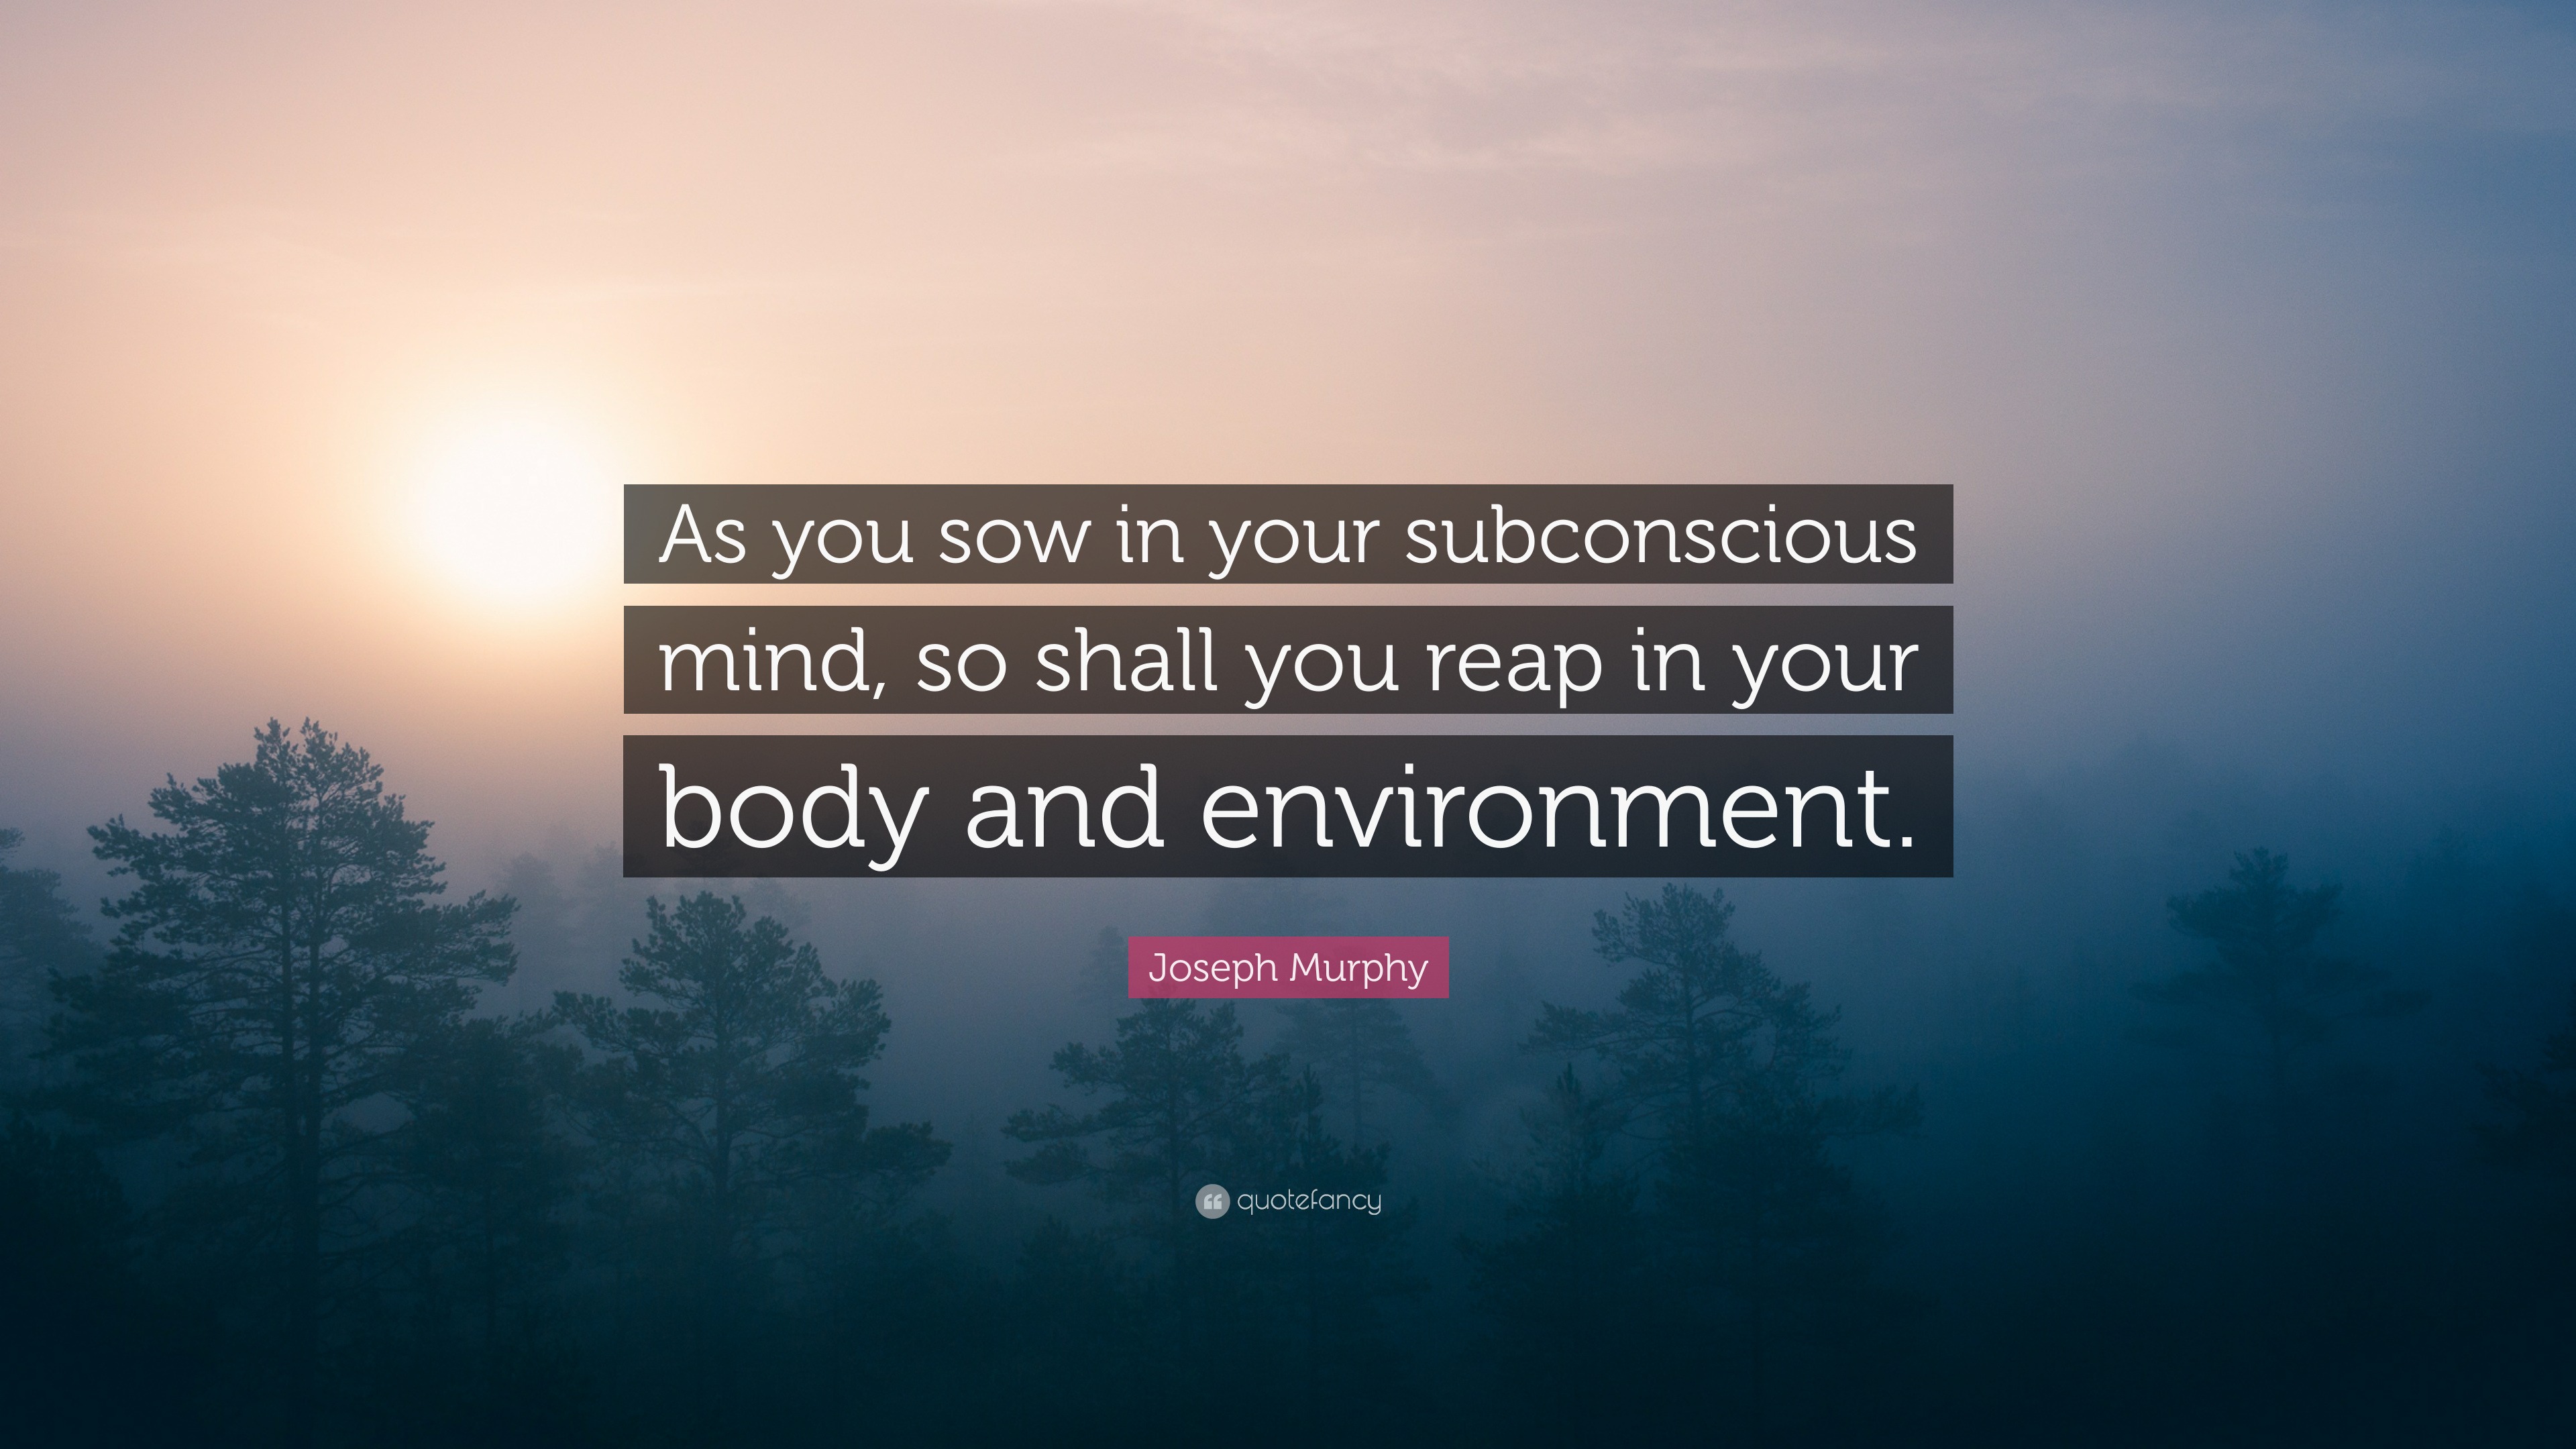 Joseph Murphy Quote: As you sow in your subconscious mind so shall